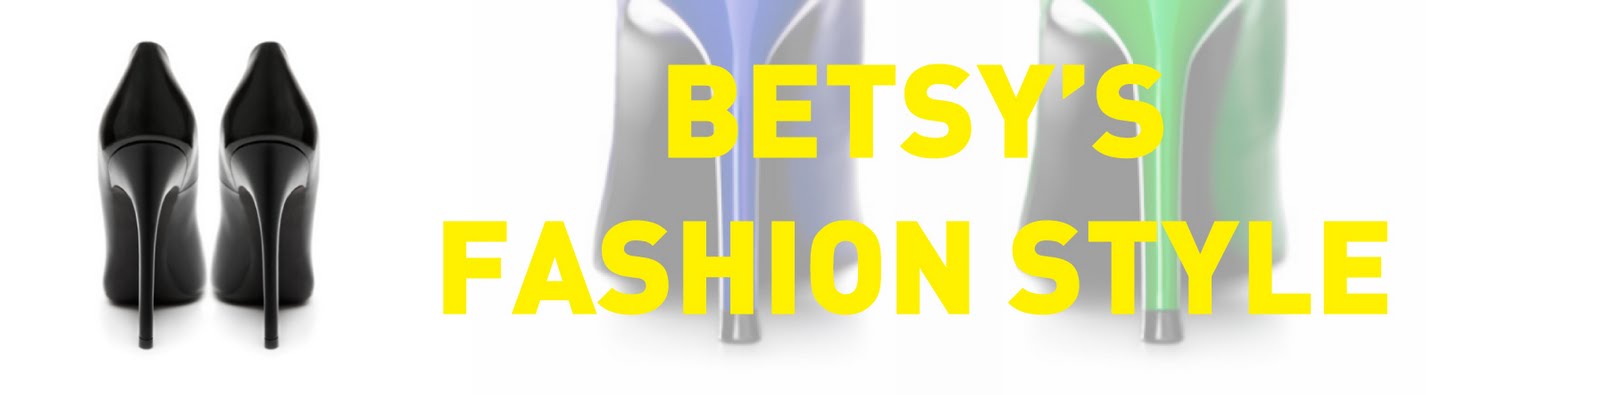 Betsy's Fashion Style